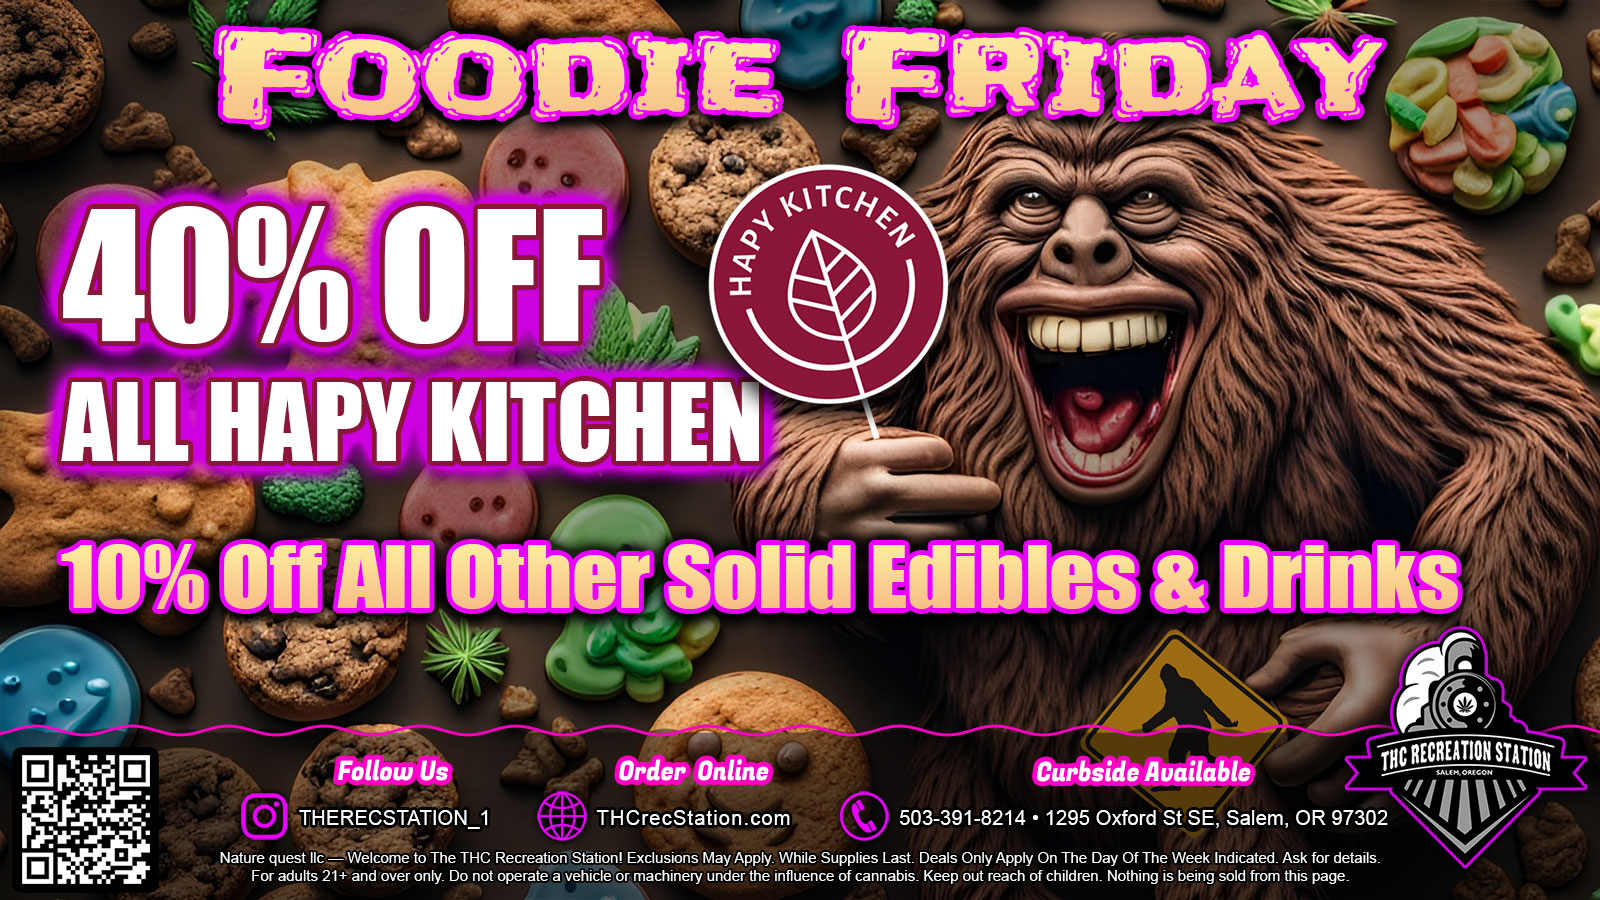 Foodie Fridays Sale - Hapy Kitchen’s Foodie Friday saves you 40% Off All Hapy Kitchen's Award Winning Products! Plus there's 10% Off all other brands of solid edibles storewide, as well as Magic, Keep and WYLD CBD Drinks!